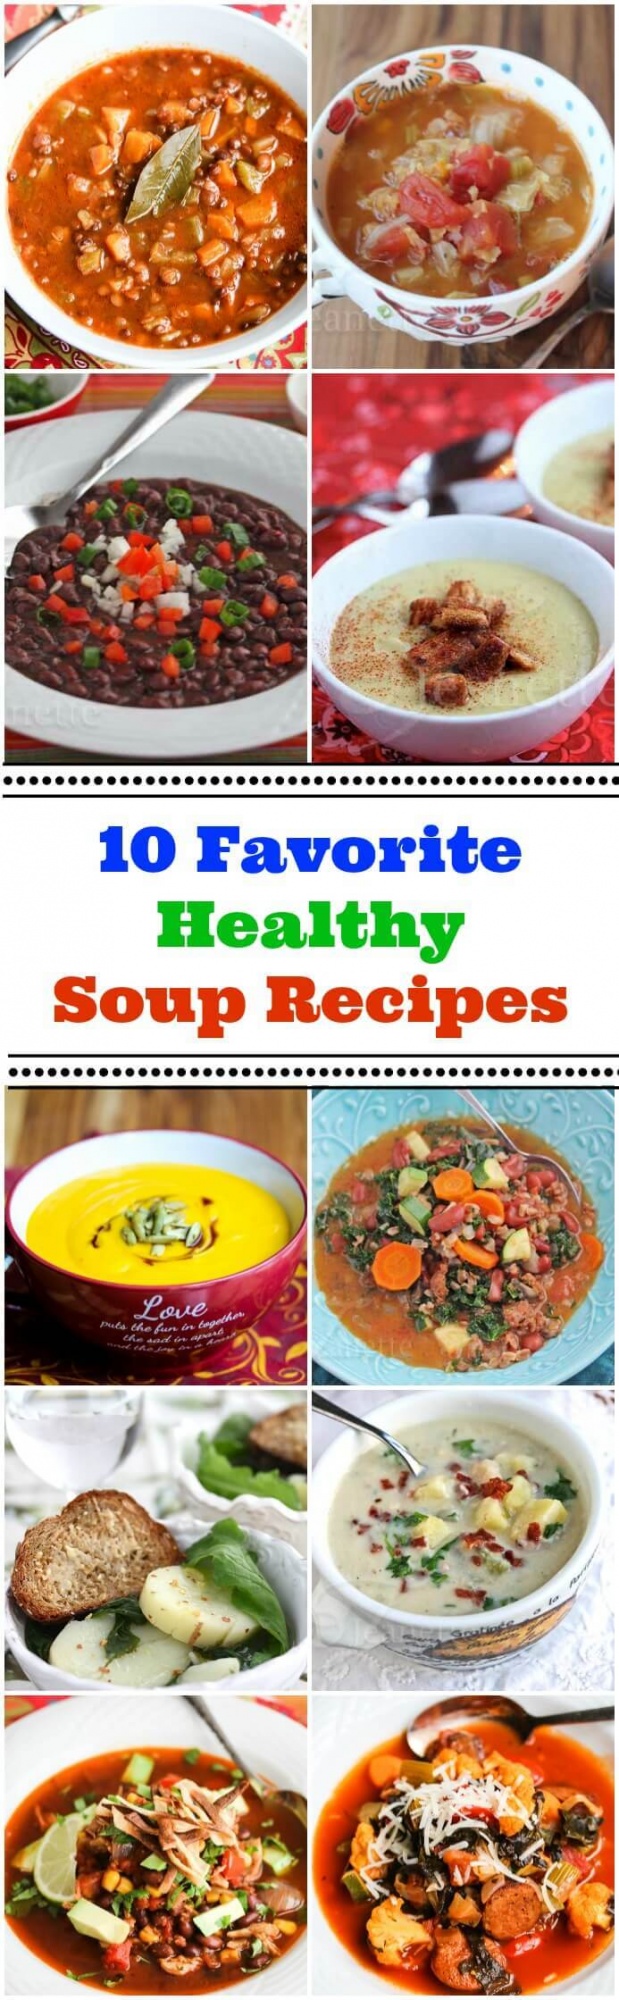 Ten Favorite Healthy Soup Recipes - Keep your belly warm while eating healthy with all these soups made with whole ingredients